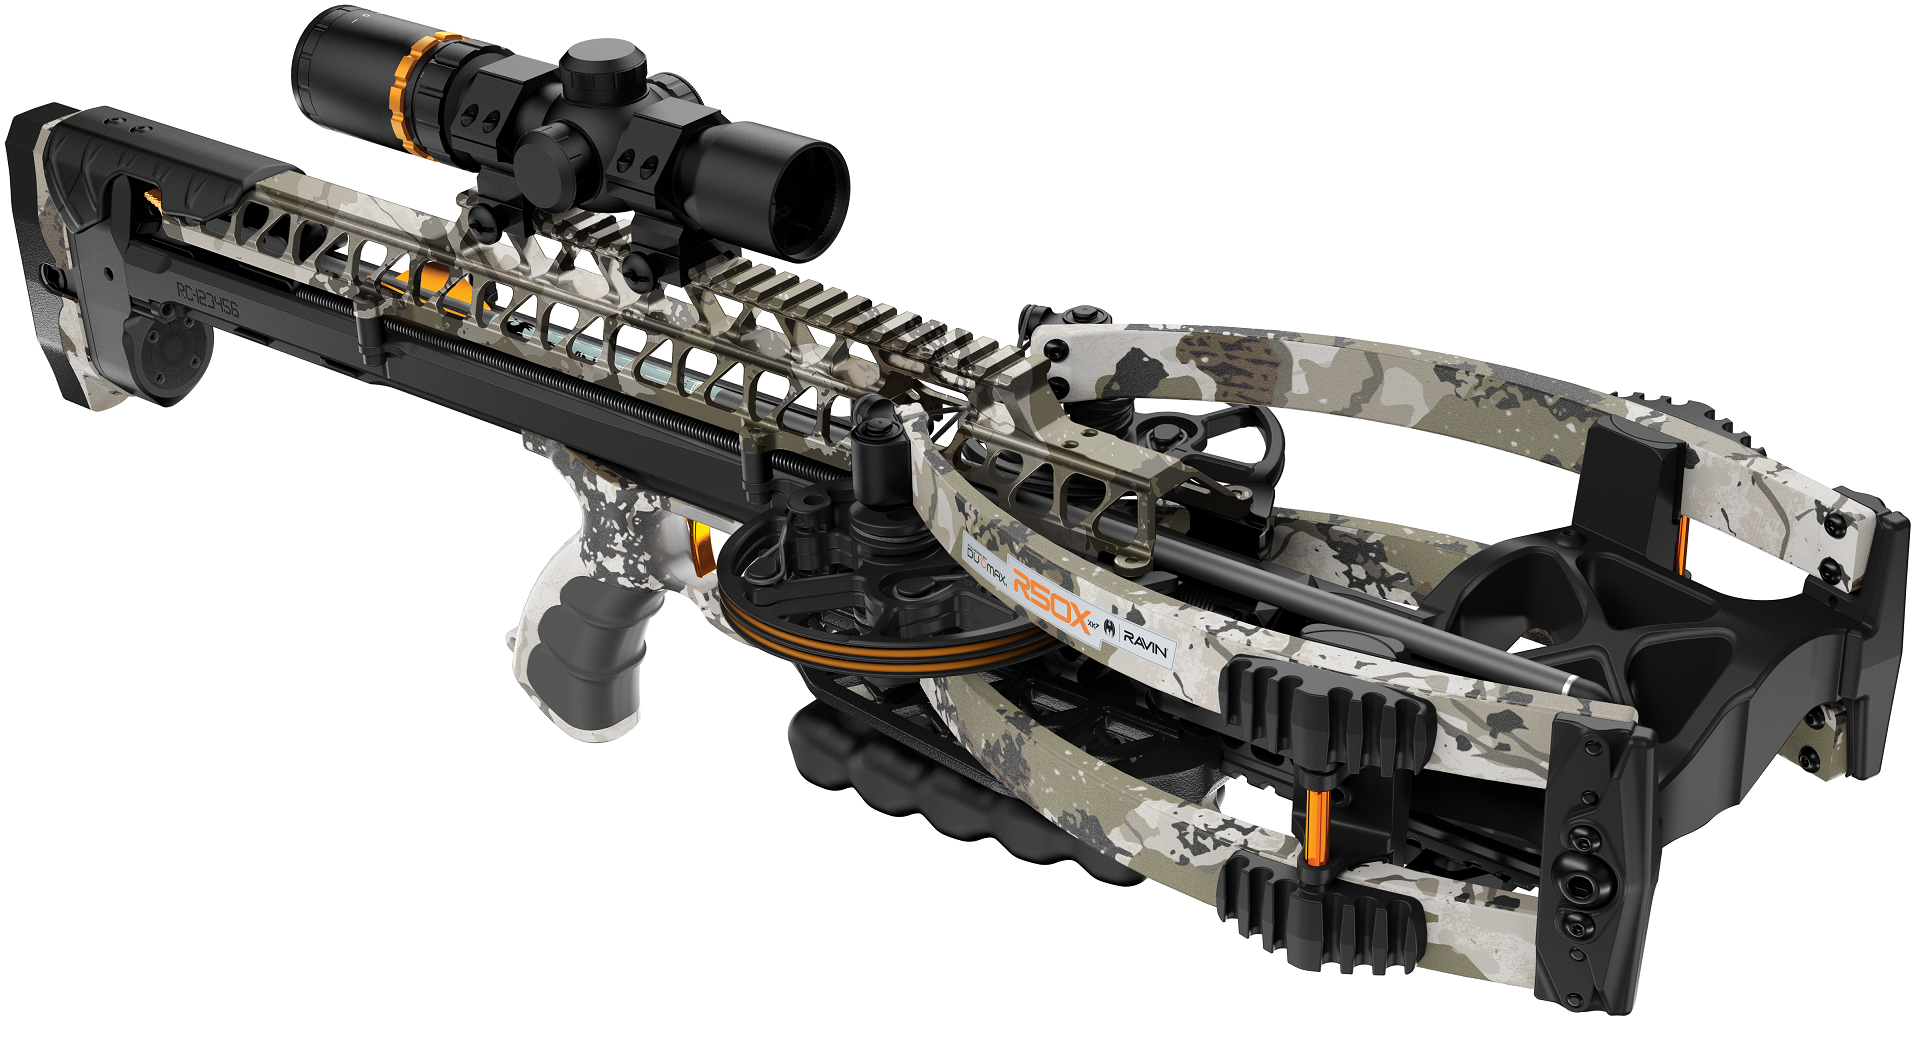 A New Top Crossbow? The new DuoCam Equipped Ravin R50X